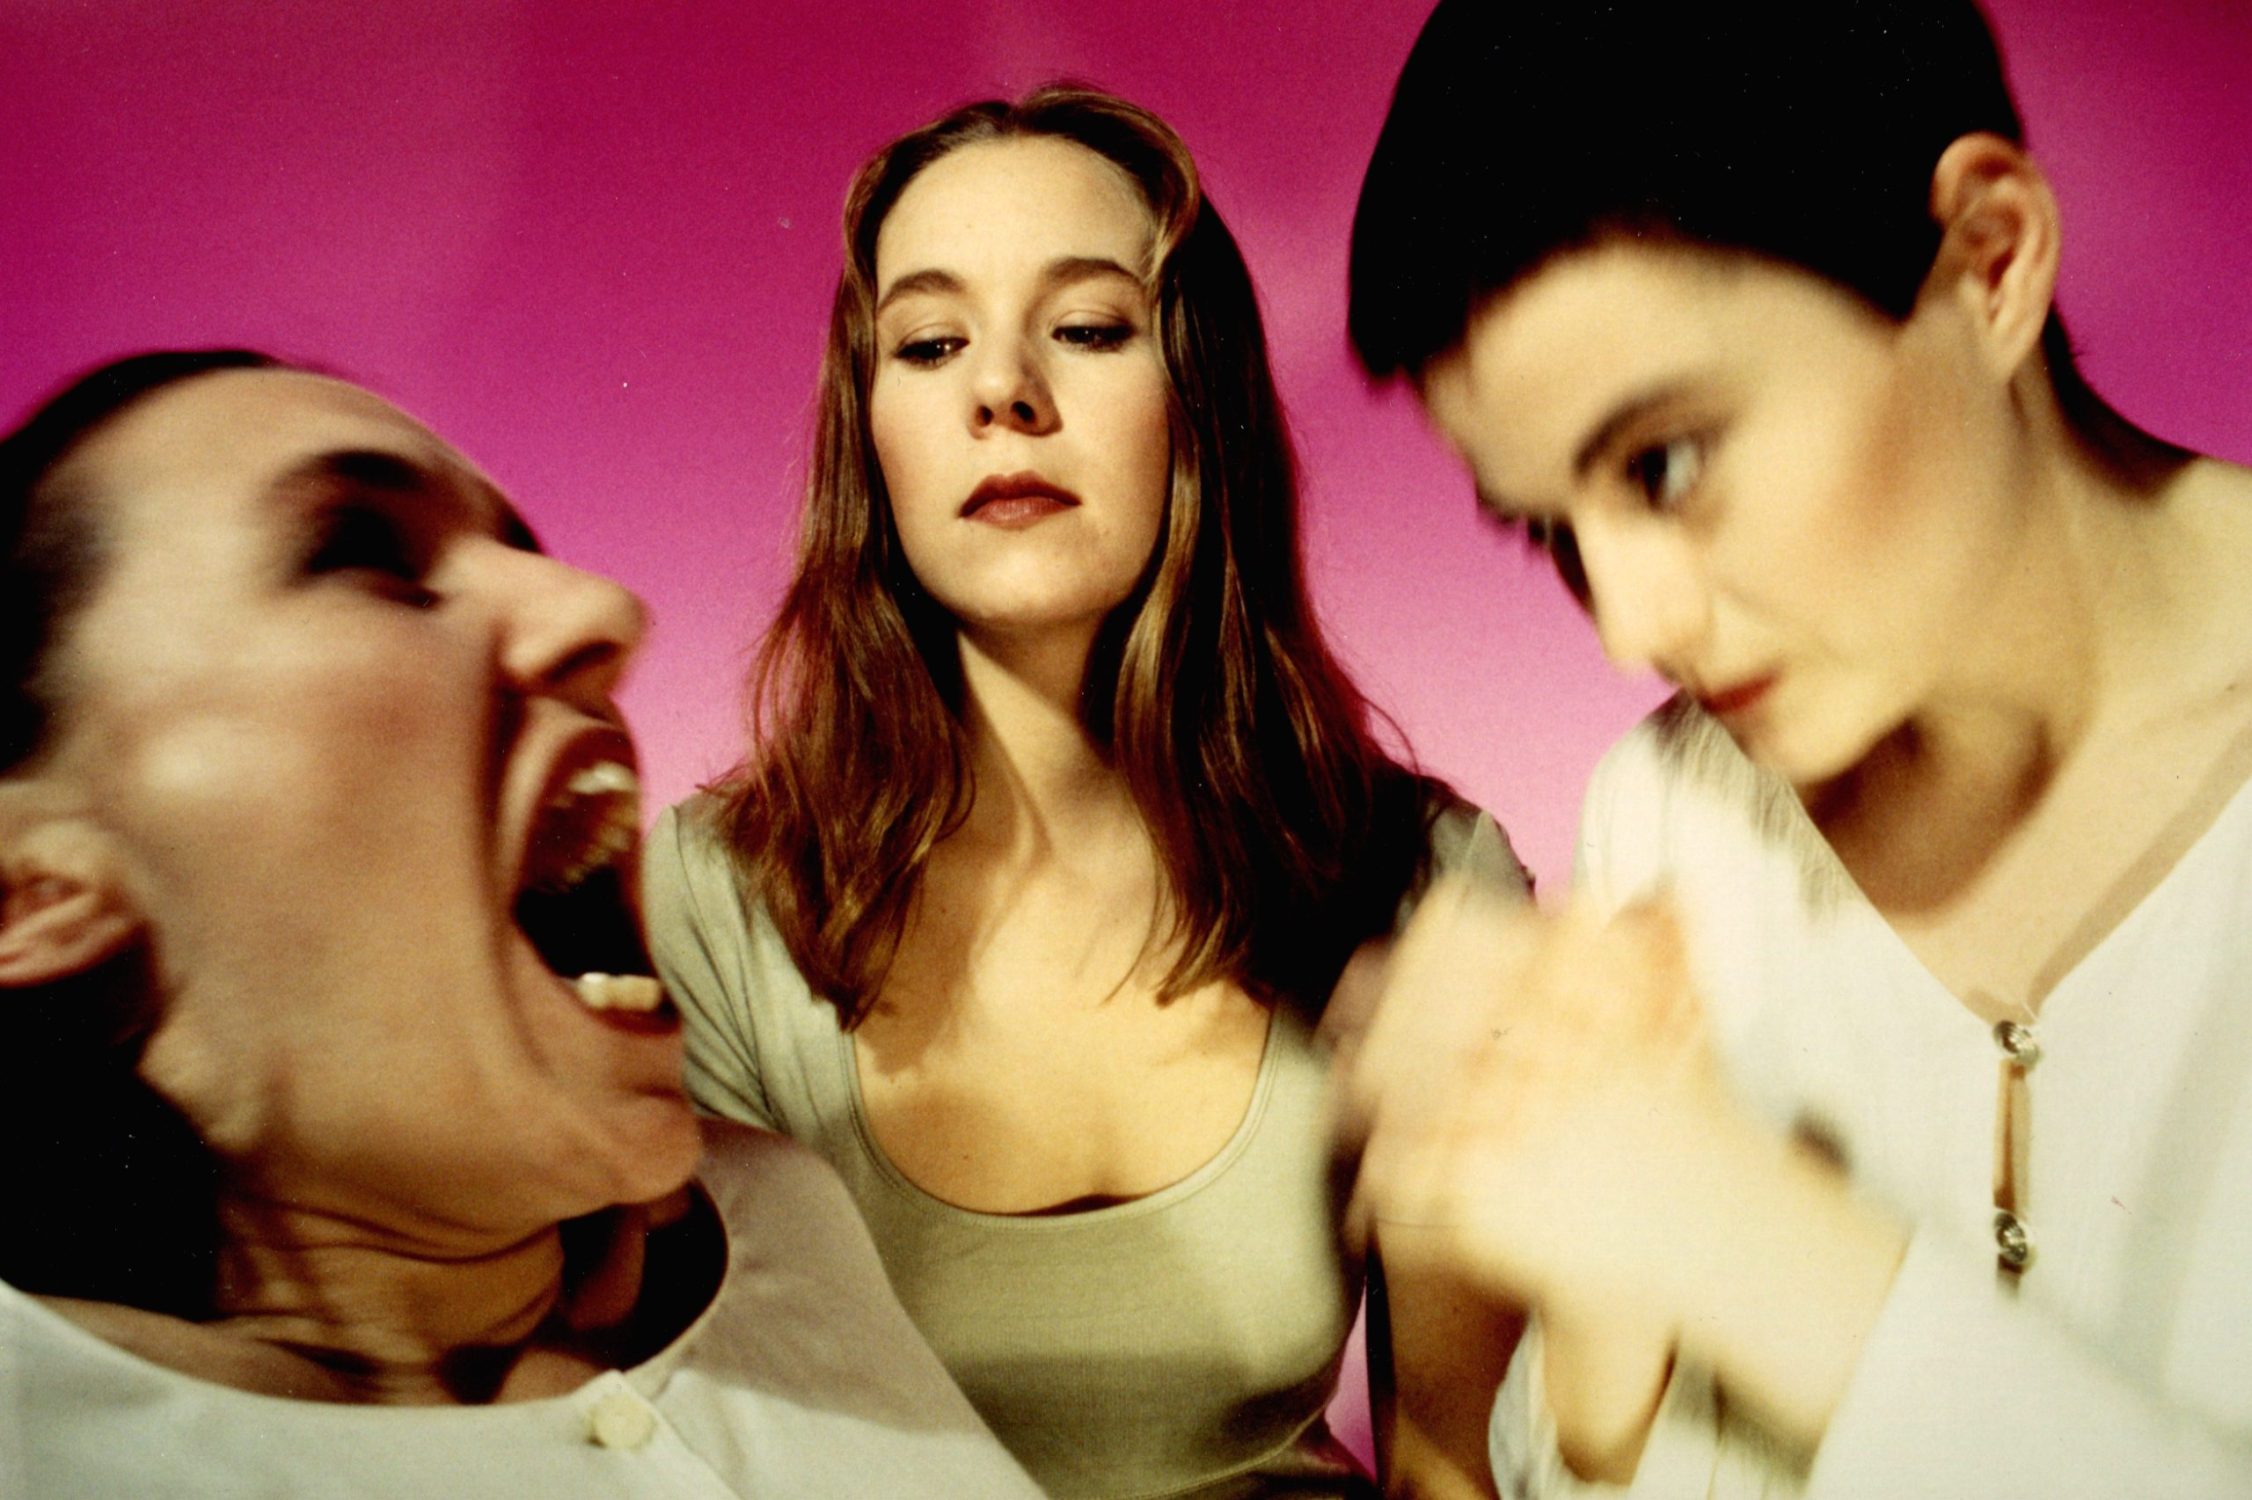 Three woman are stood together against a pink background. 2 women are blurred, one with hteir mouth wide open.